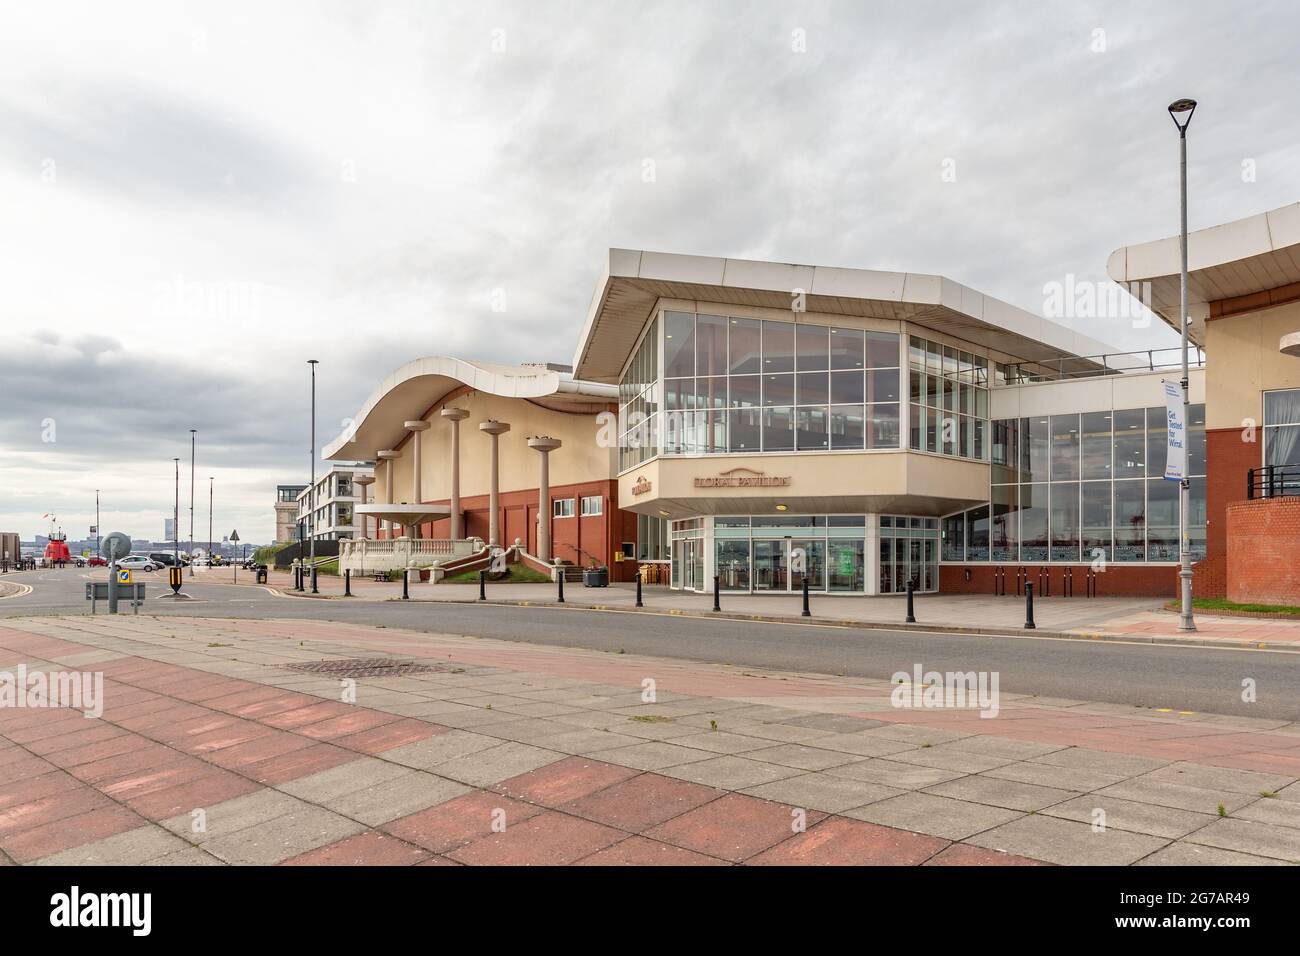 Floral Pavilion Theatre, New Brighton, Wirral, UK. Entertainment venue situated on the promenade overlooking the River Mersey. Stock Photo